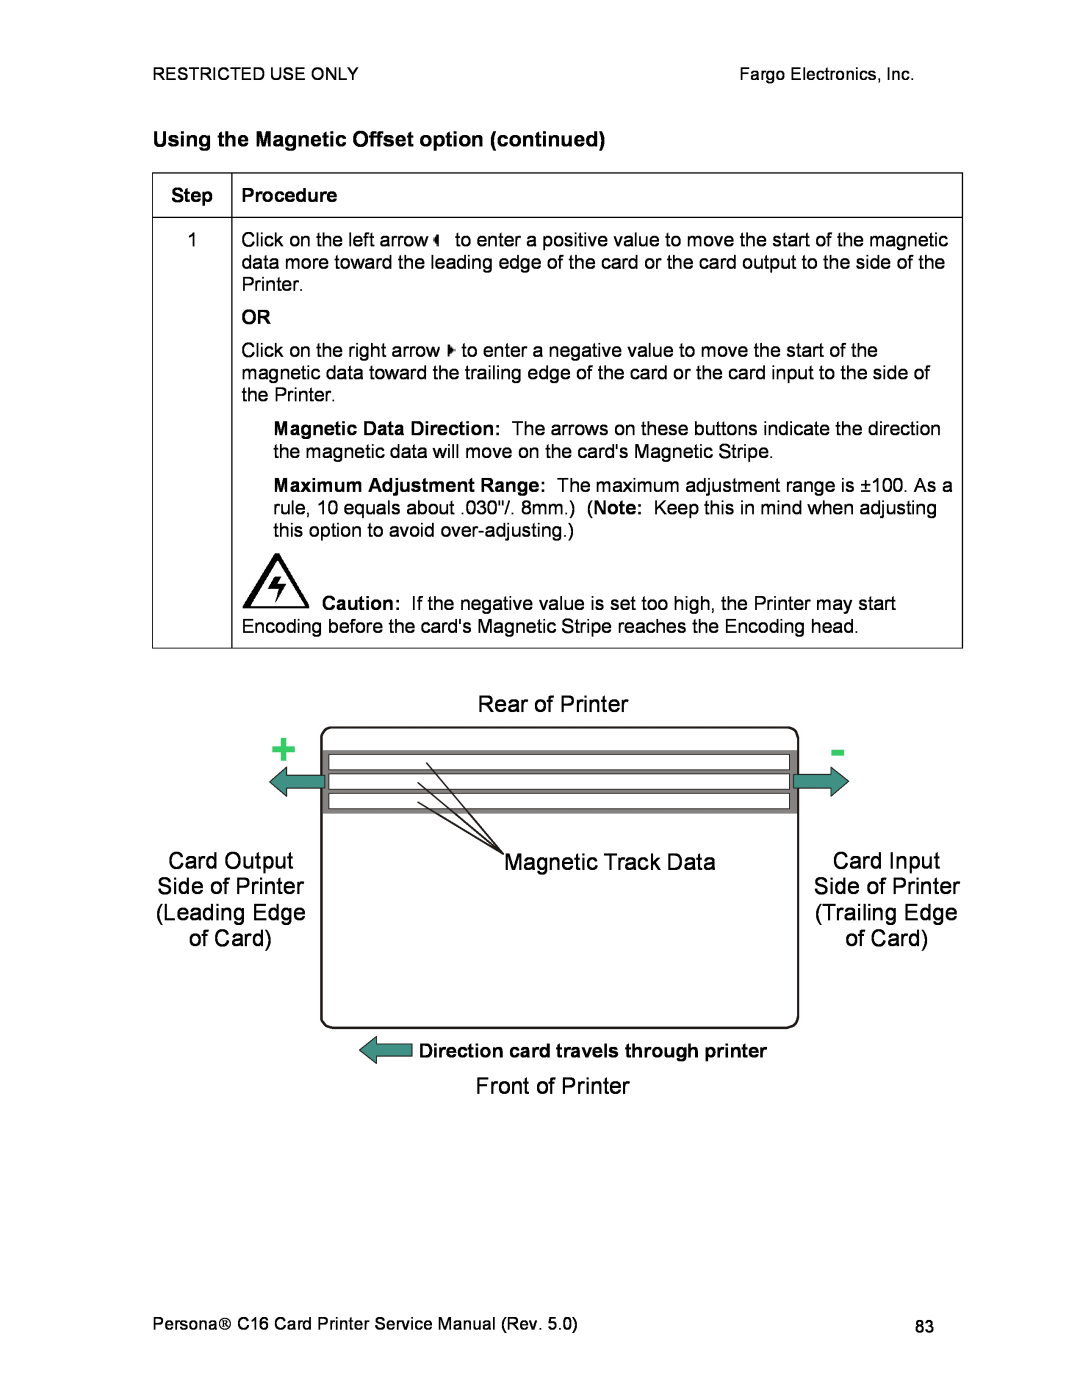 FARGO electronic C16 service manual Using the Magnetic Offset option continued 